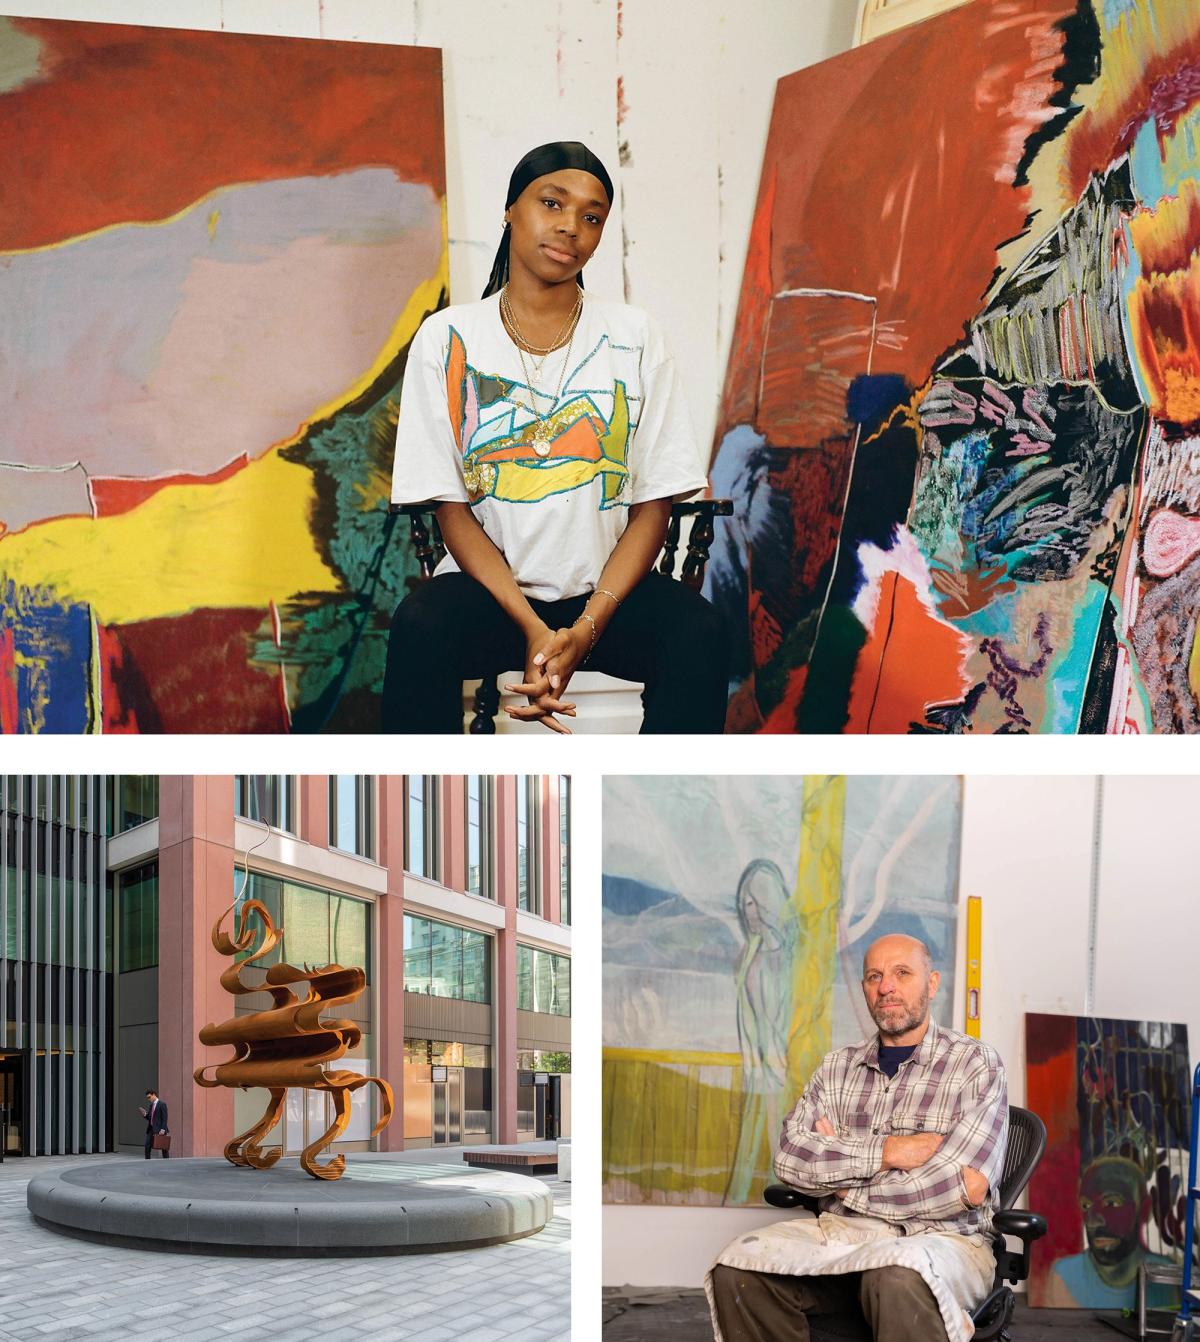 Rachel Jones (top) and Peter Doig (right) have left their galleries, while Nick Hornby says he has to explore “atypical scenarios” to realise public sculptures such as Power over others is Weakness disguised as Strength (2023, left)

Jones: Photo Adama Jalloh, Courtesy Thaddaeus Ropac gallery. Dornby: © Nick Hornby Studios. Doig: Photo Fergus Carmichael, Courtesy The Courtauld